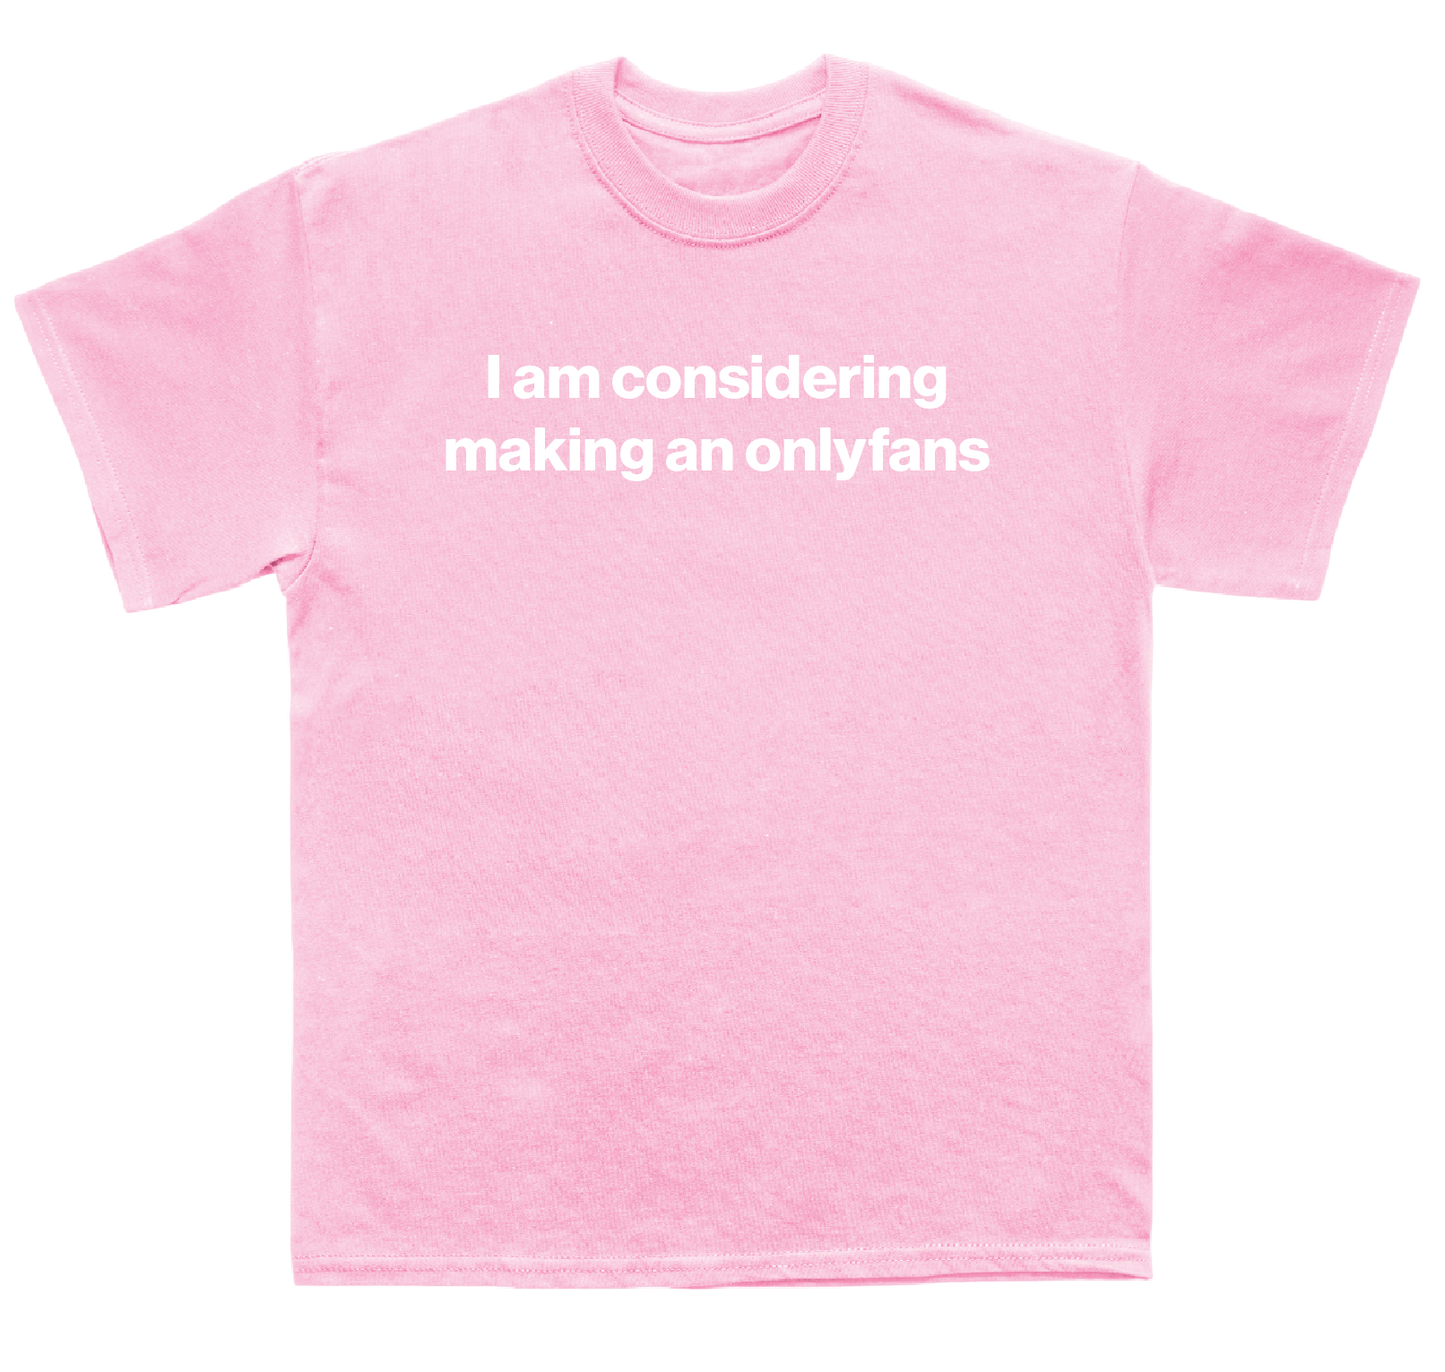 I am considering making an onlyfans shirt